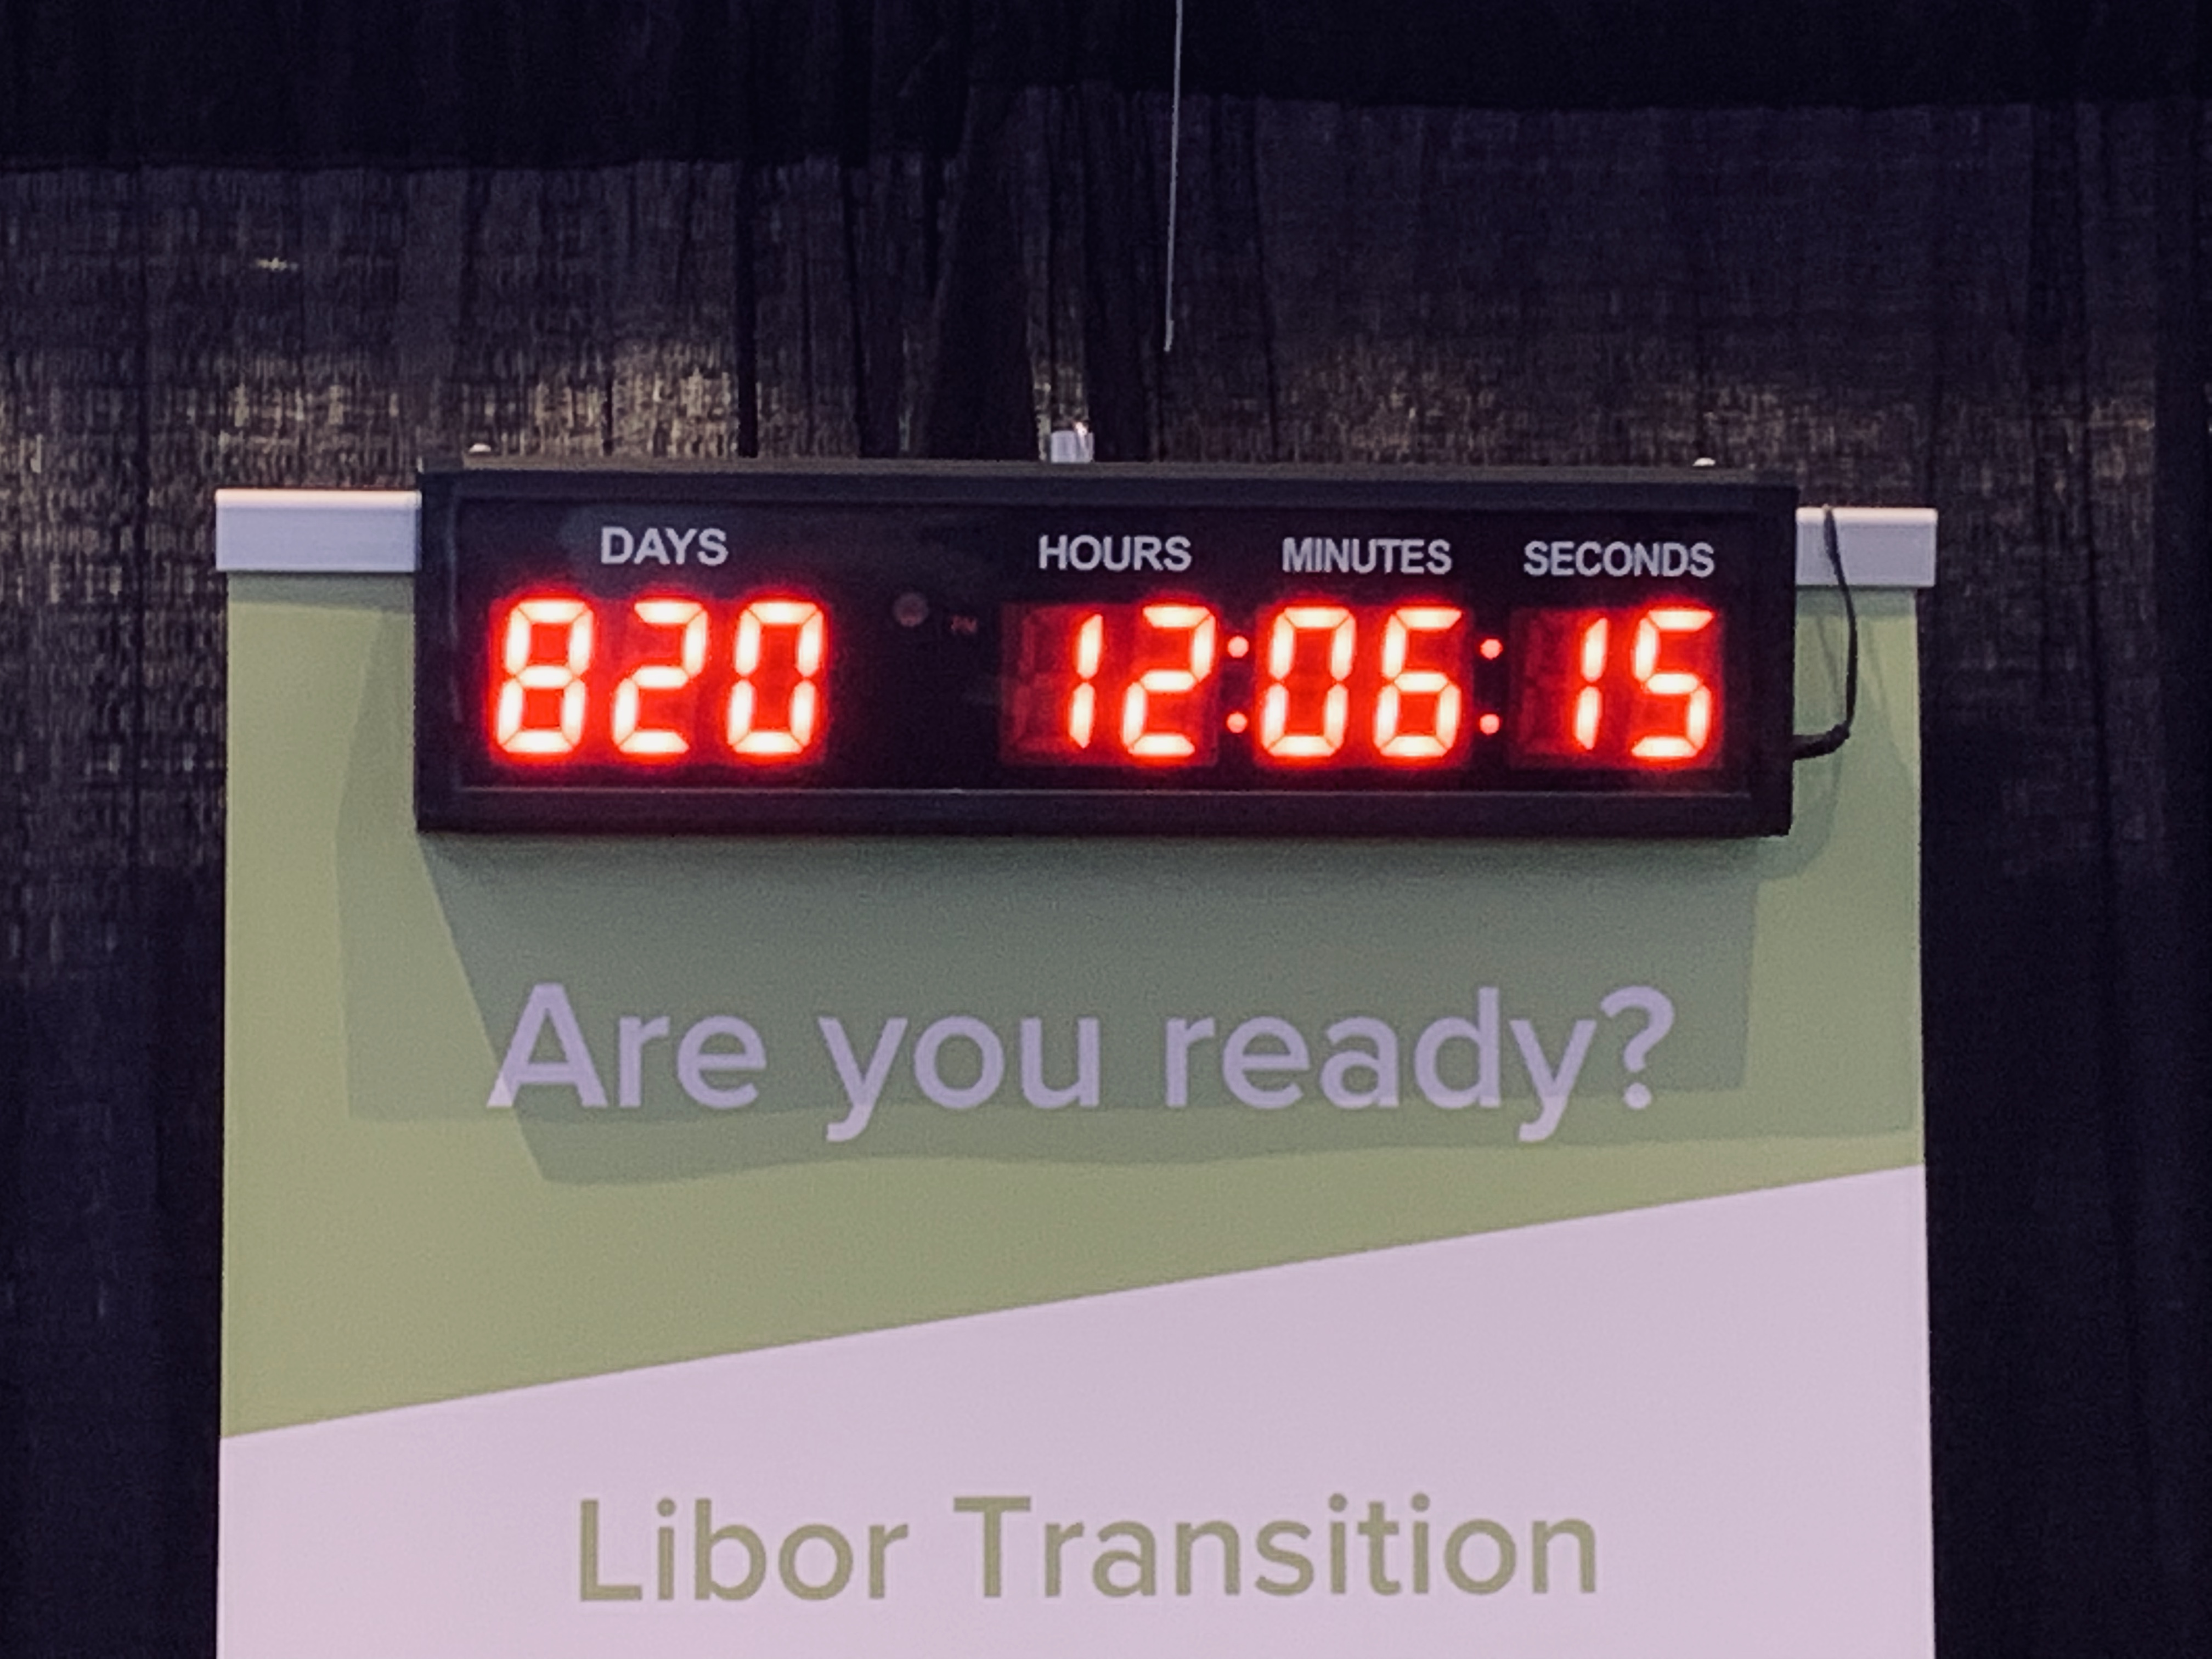 Countdown clock to LIBOR transitions deadline at ABS East 2019 in Miami. Exhibition Hall, dealVector booth. Photograph by Joey Pizzolato